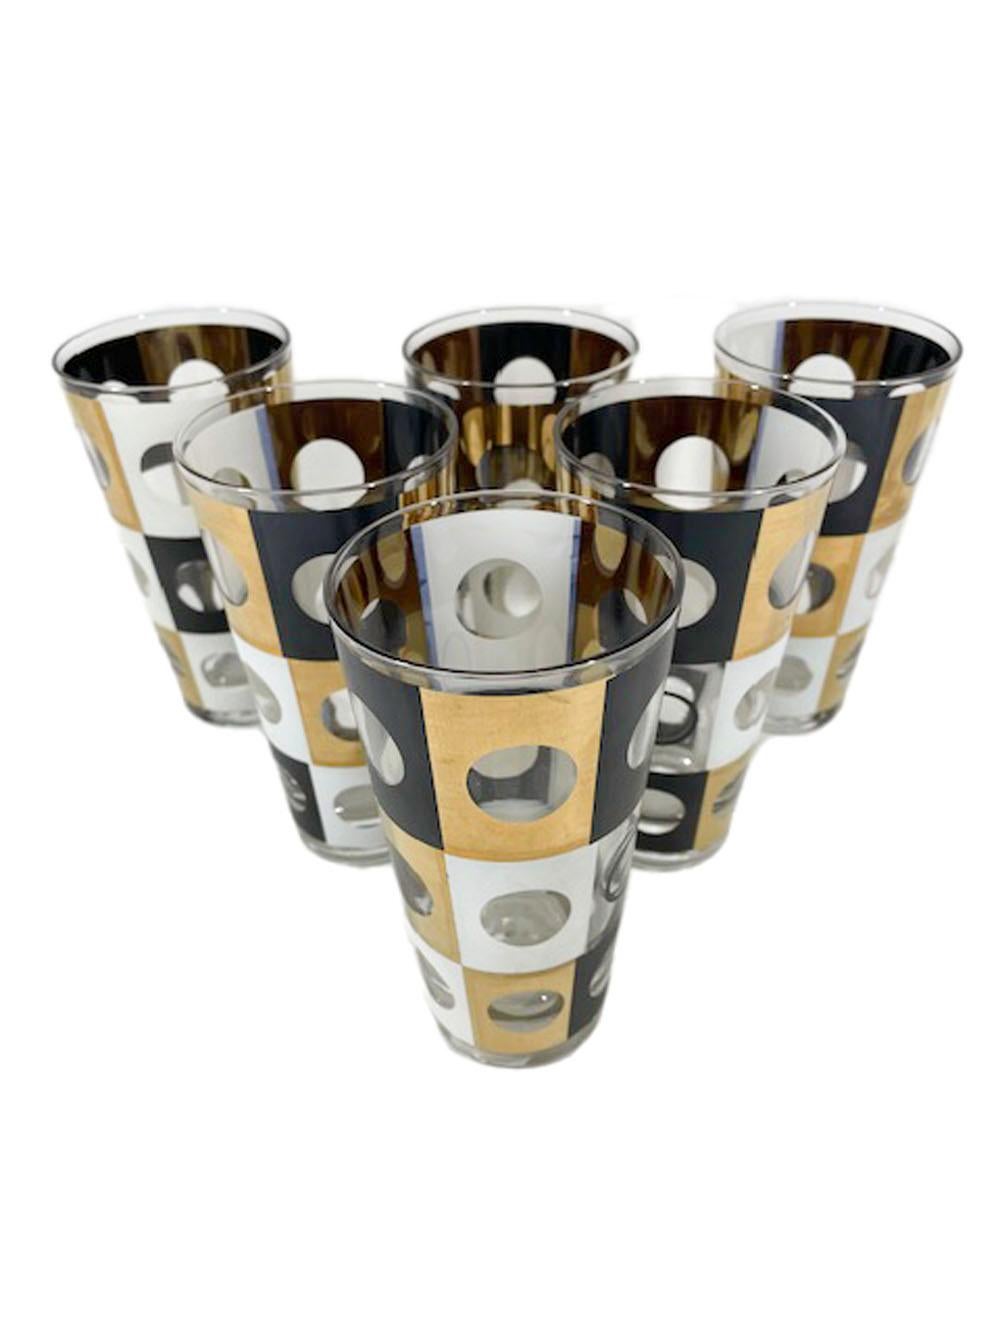 20th Century Mid-Century Geometric Barware Set in Black and White Enamel with 22 Karat Gold For Sale